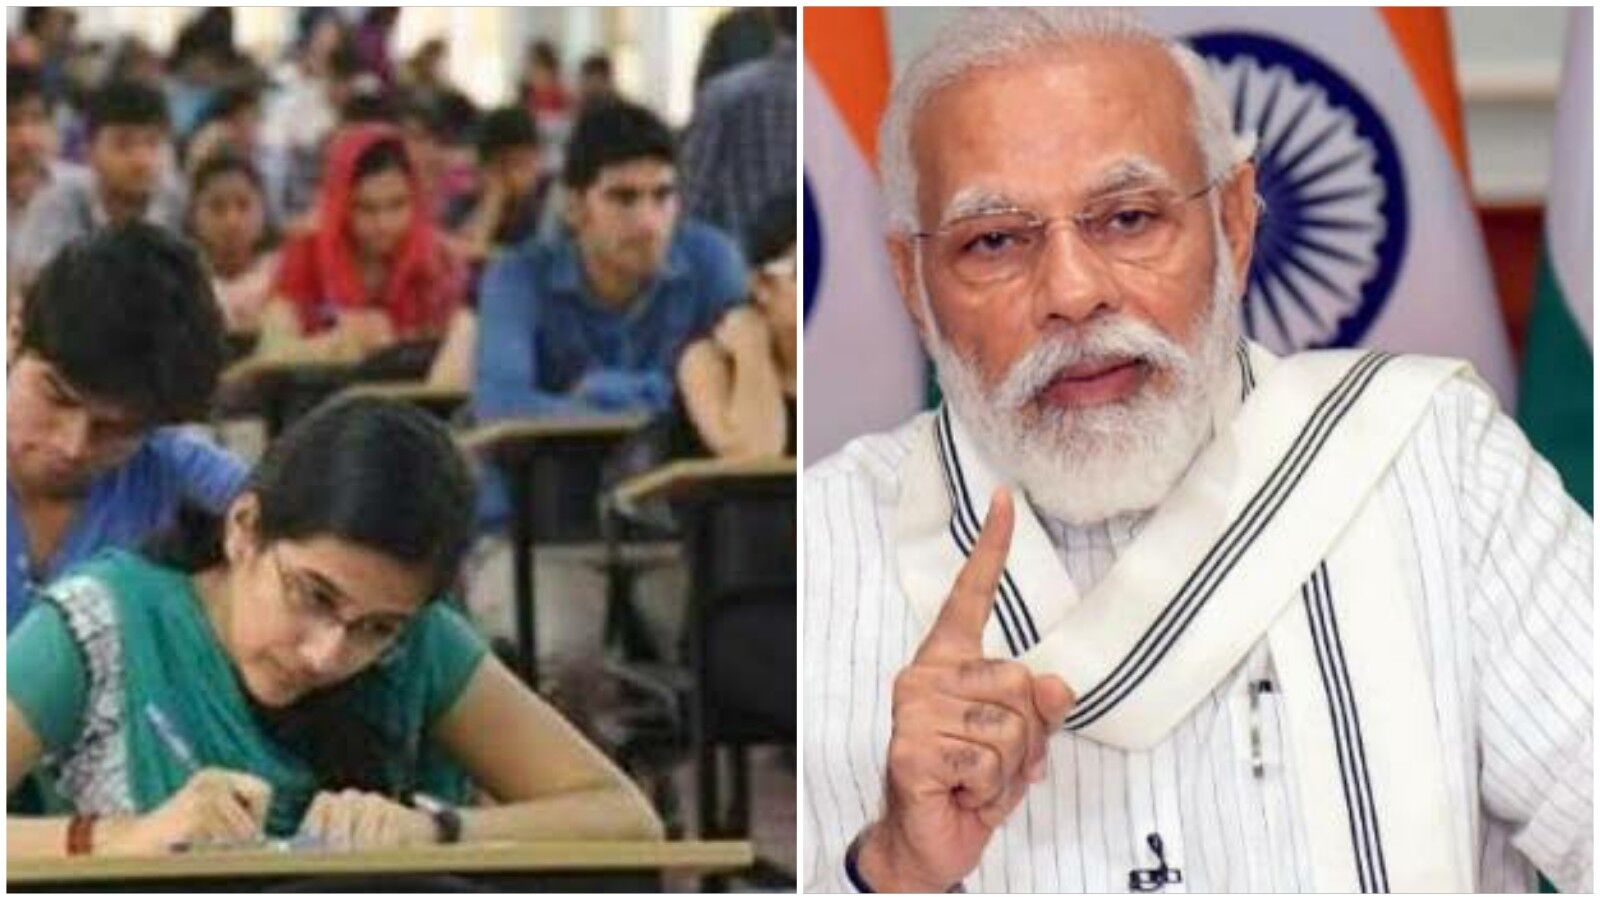 More than 100 academics wrote letter to Modi in support of NEET-JEE